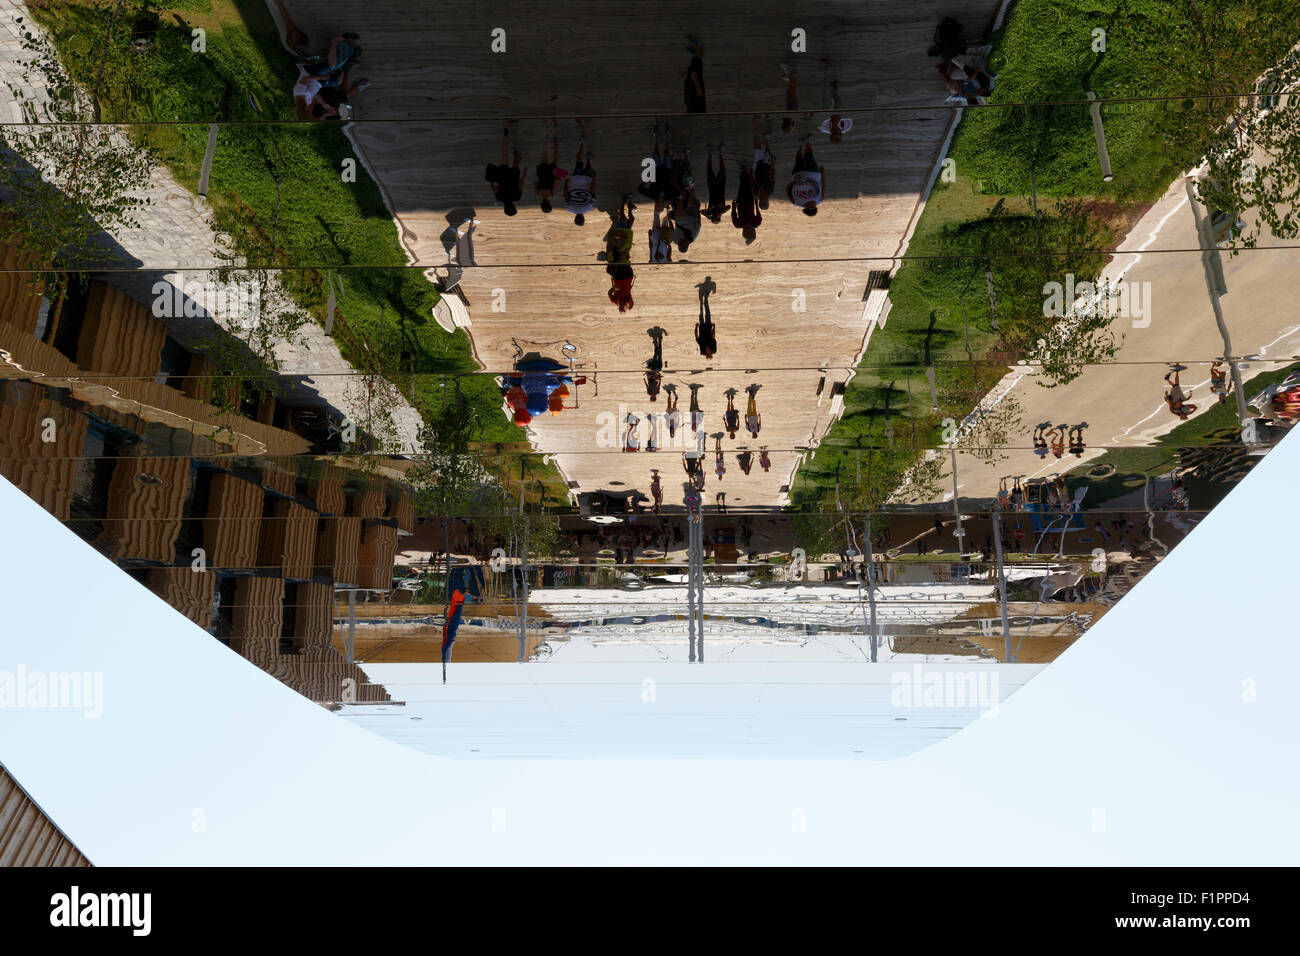 Milan, Italy, 12 August 2015: Detail of the Russian Federation pavilion at the exhibition Expo 2015 Italy. Stock Photo